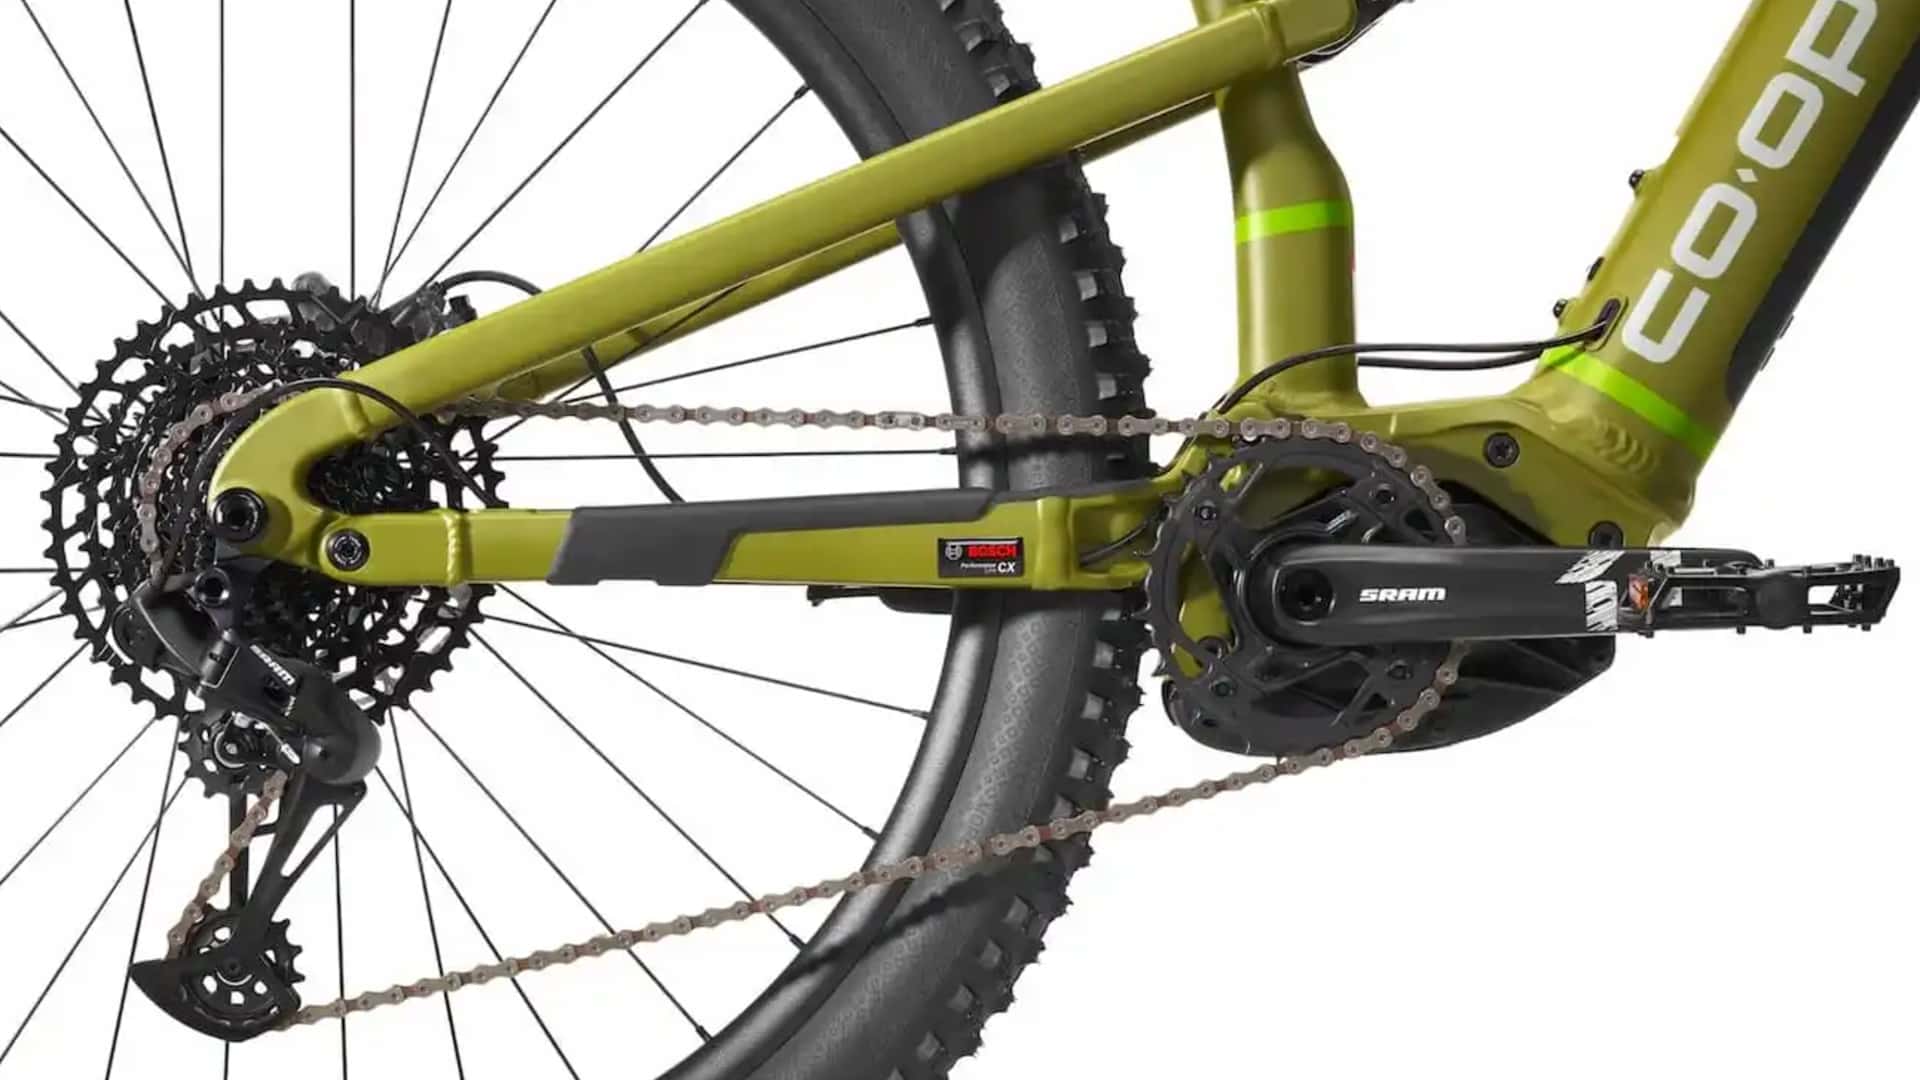 co-op cycles presents the drt e3.1, its first electric mountain bike